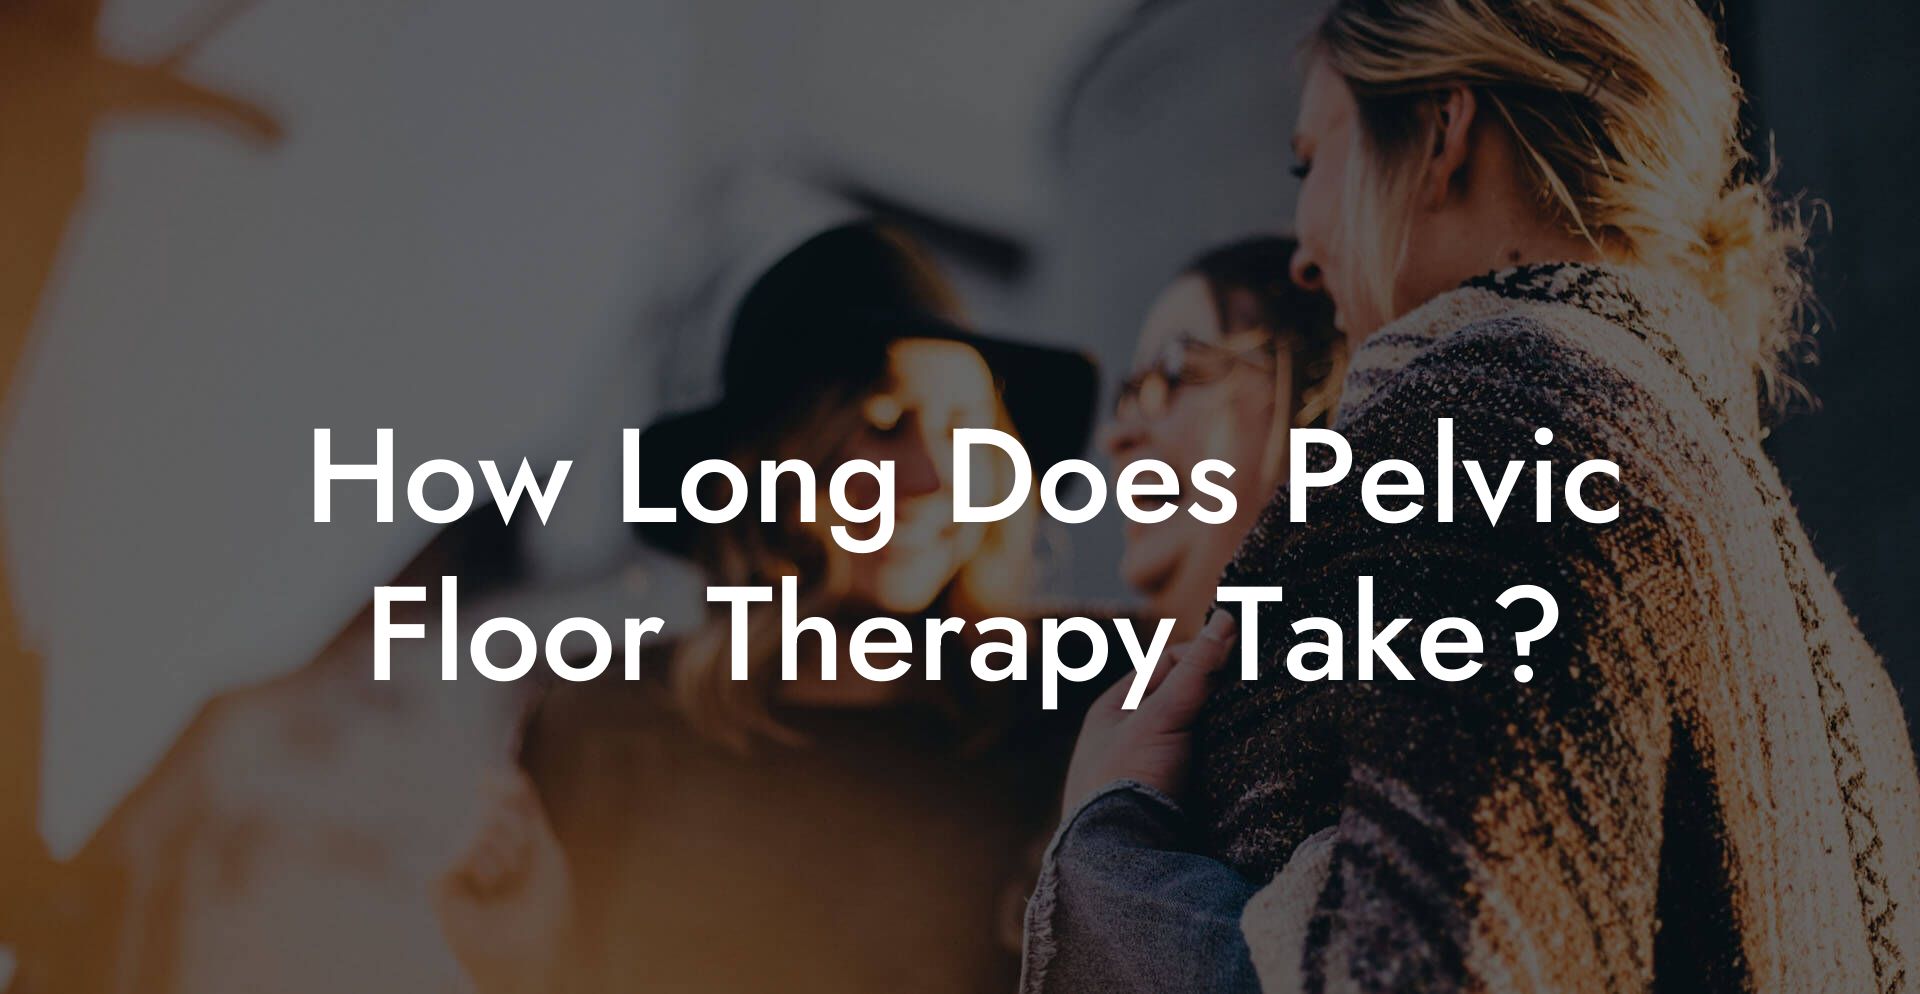 How Long Does Pelvic Floor Therapy Take?